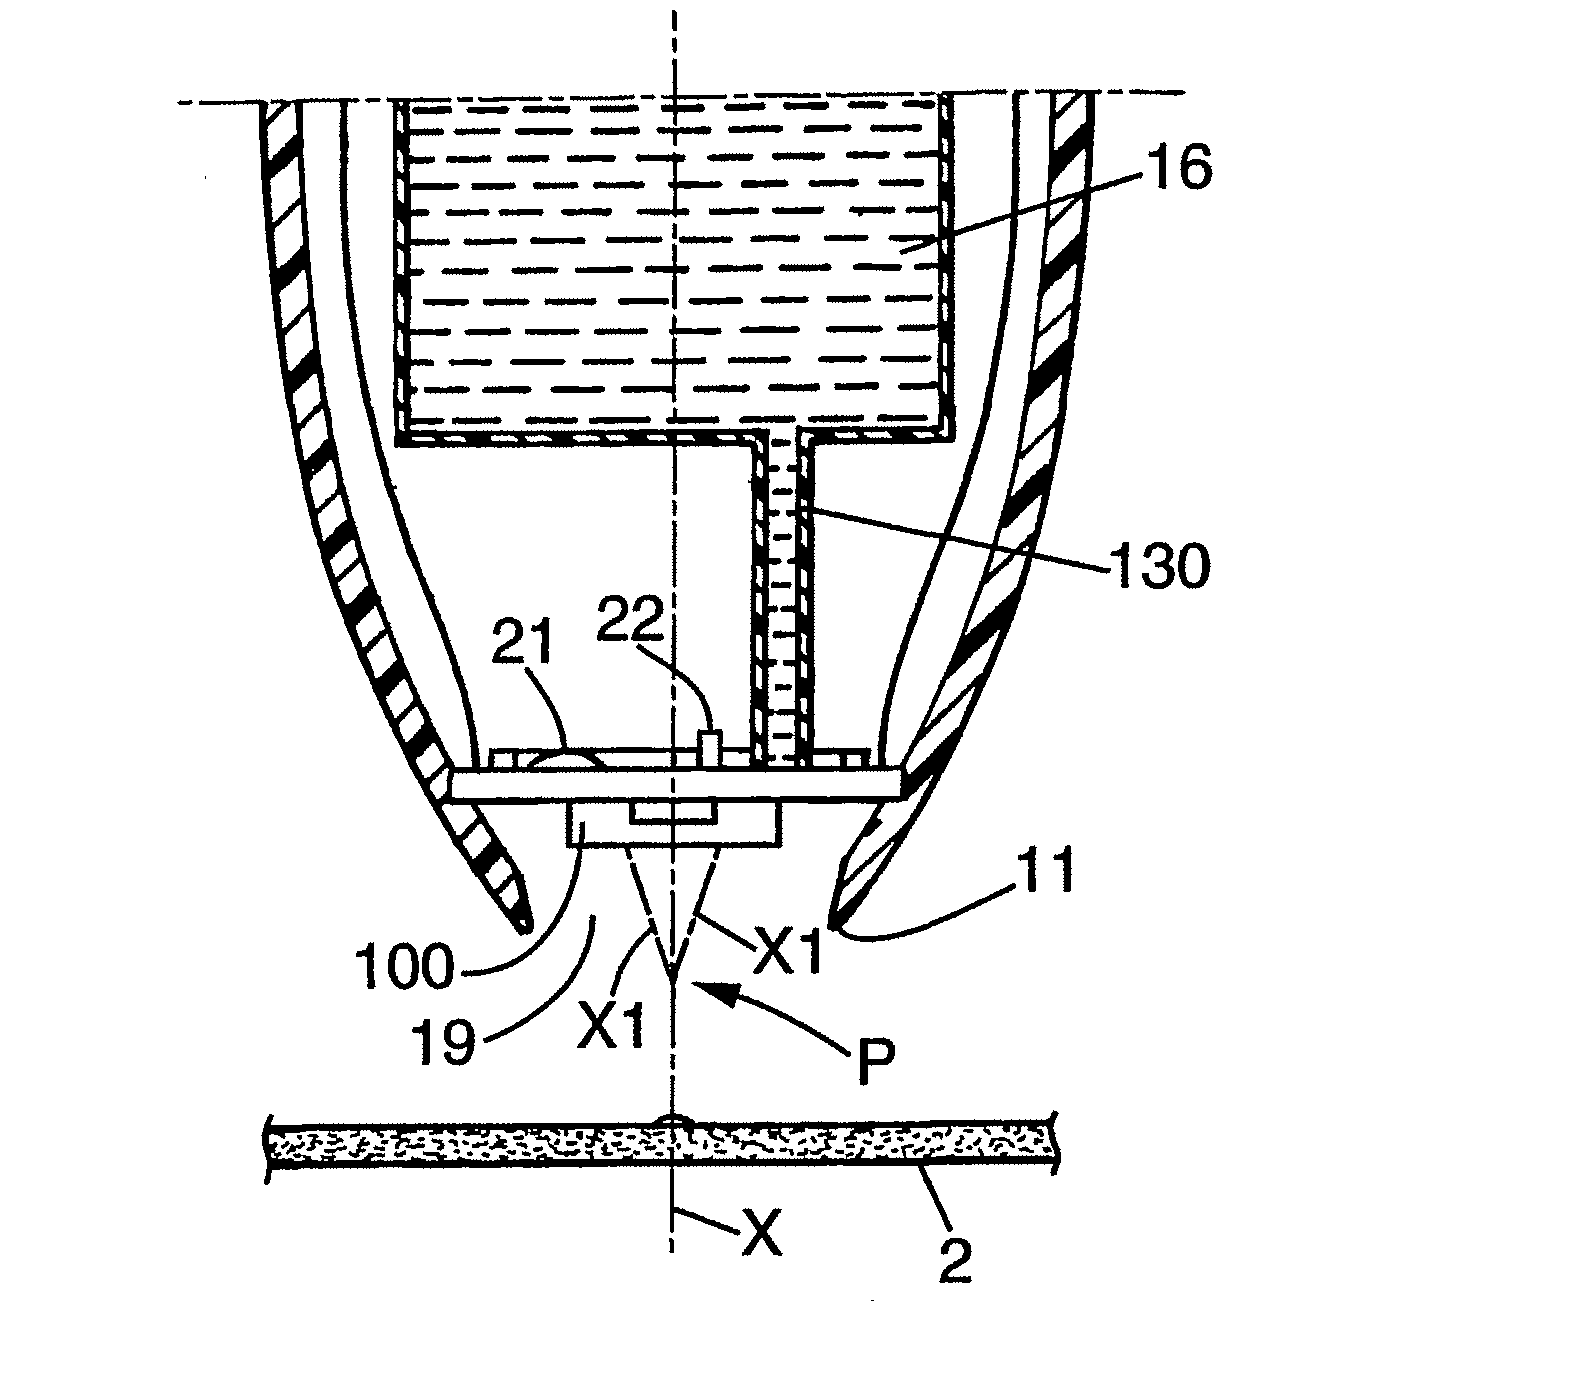 Multi-Nozzle Liquid Droplet Ejecting Head, a Writing Instrument Comprising Such a Head, and a Method of Ejecting Liquid Droplets From Same